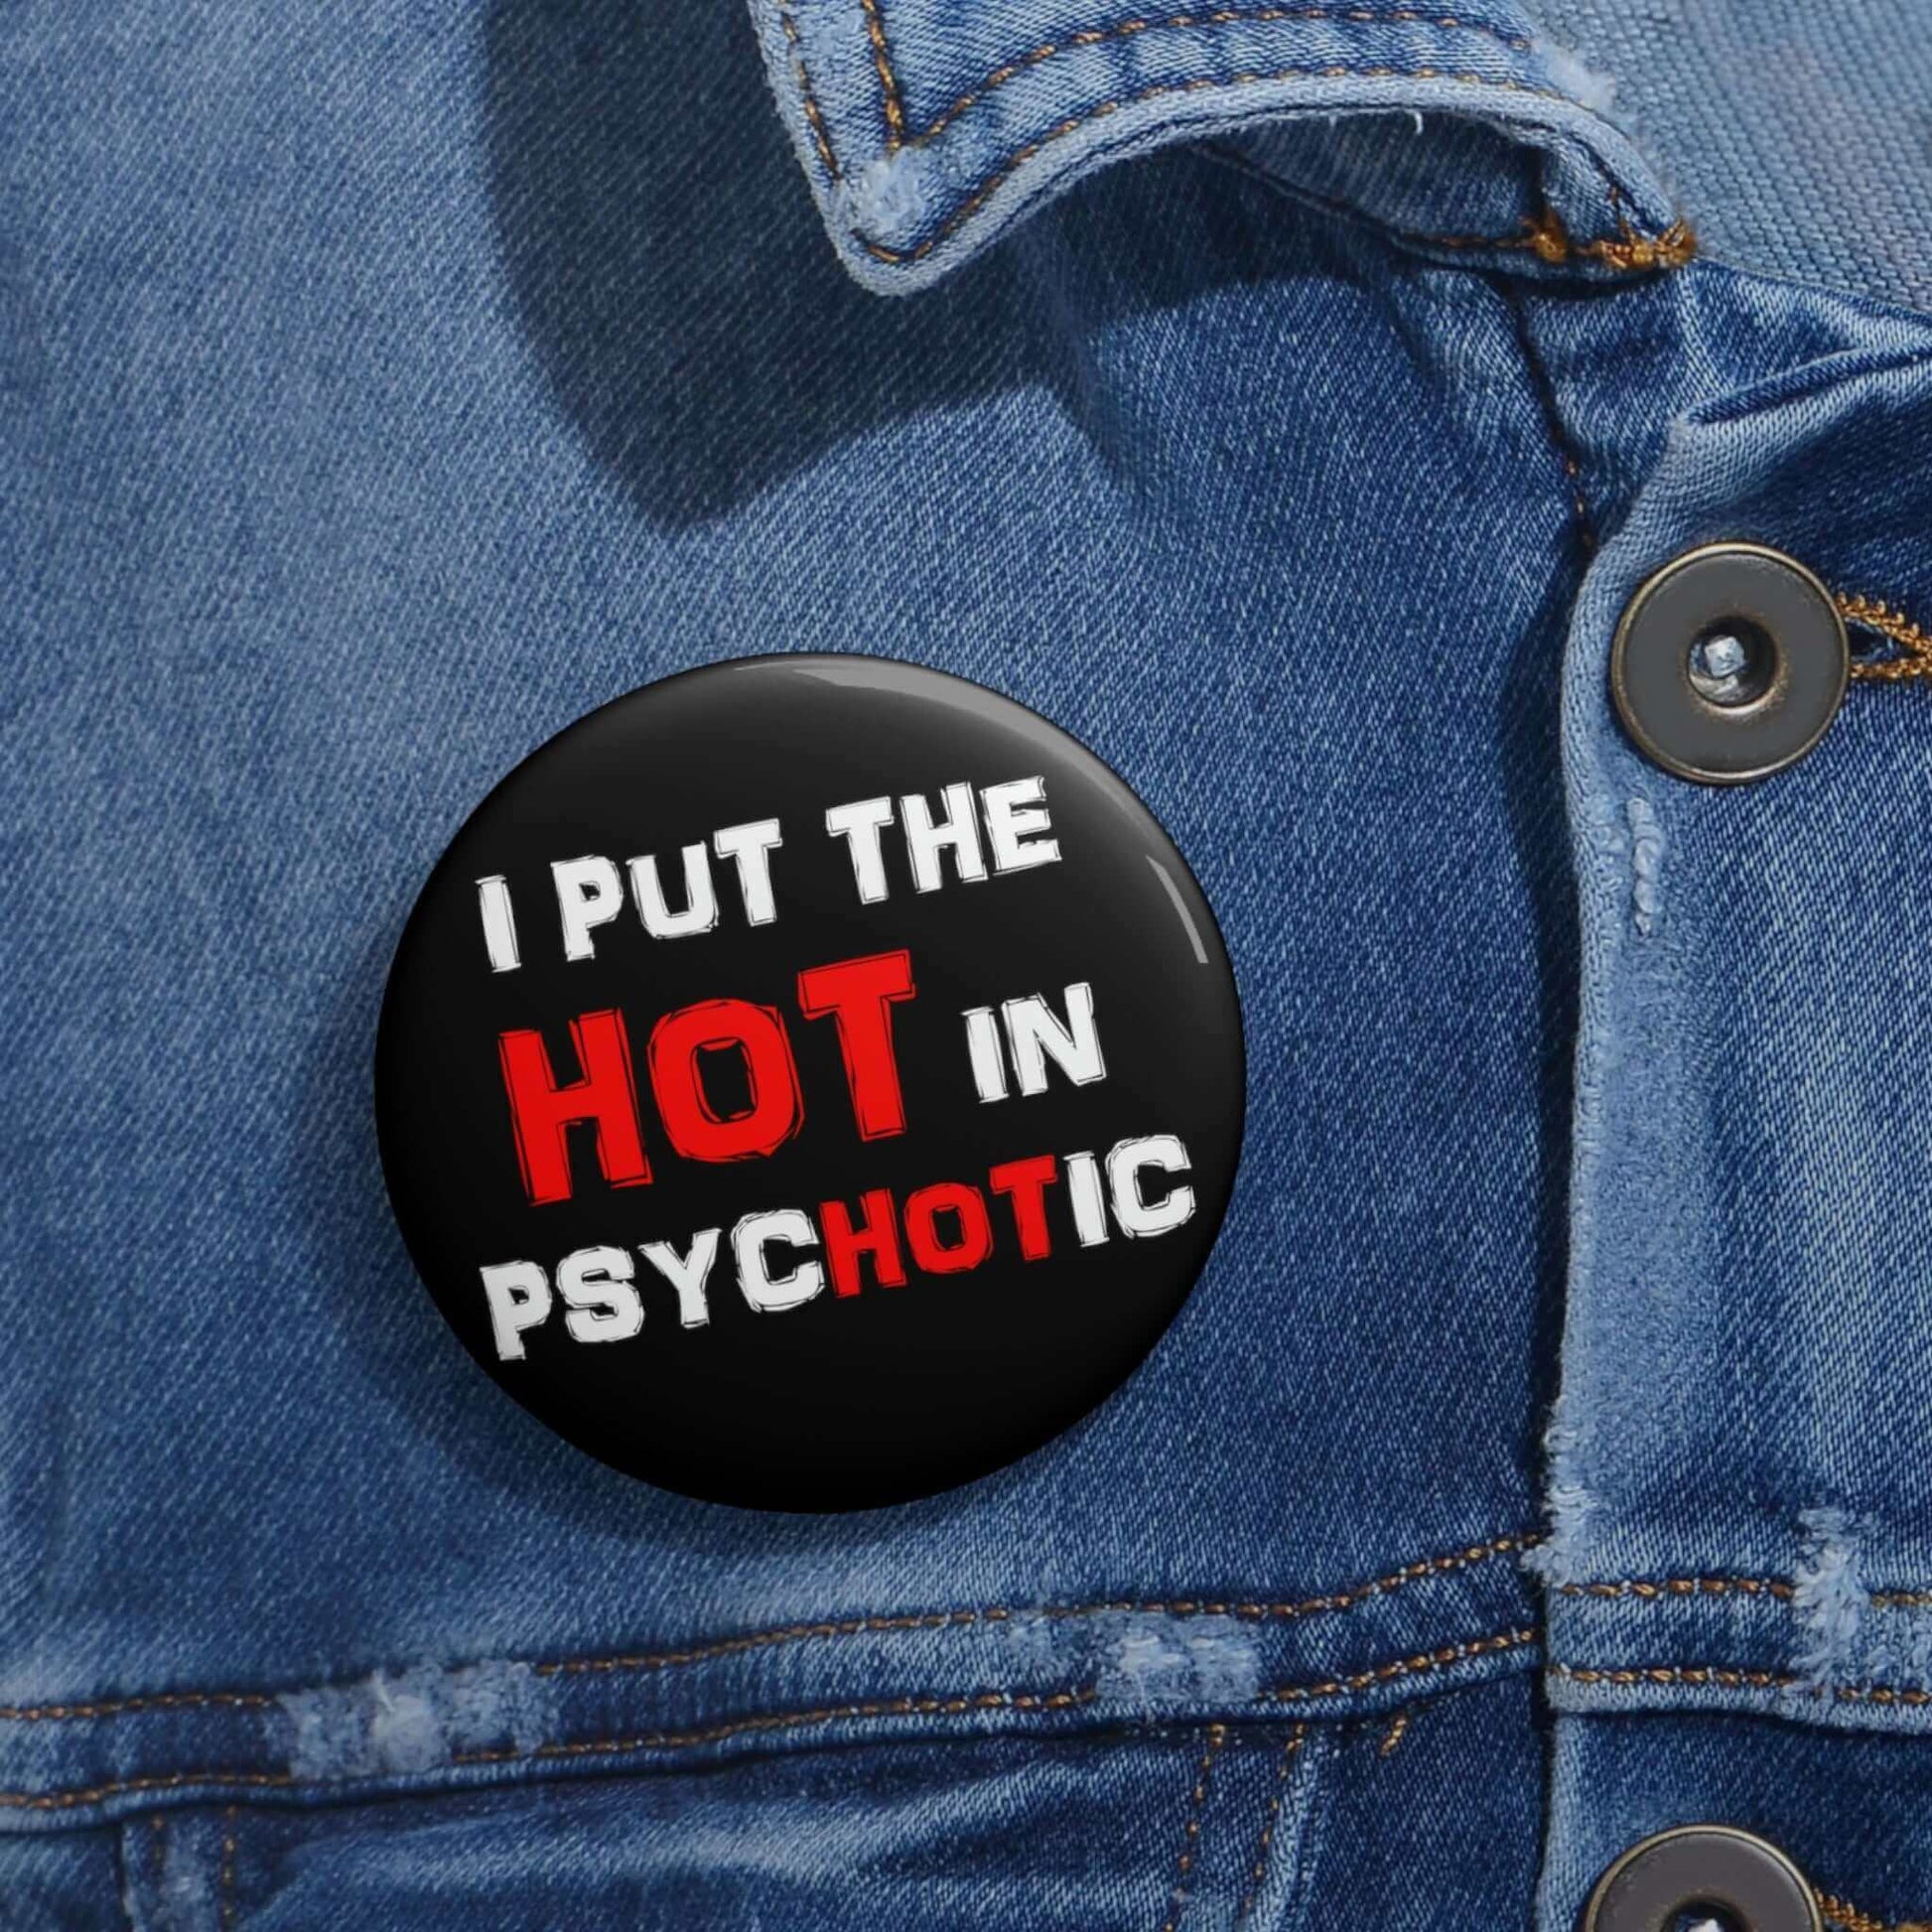 I put the hot in psychotic pinback button.